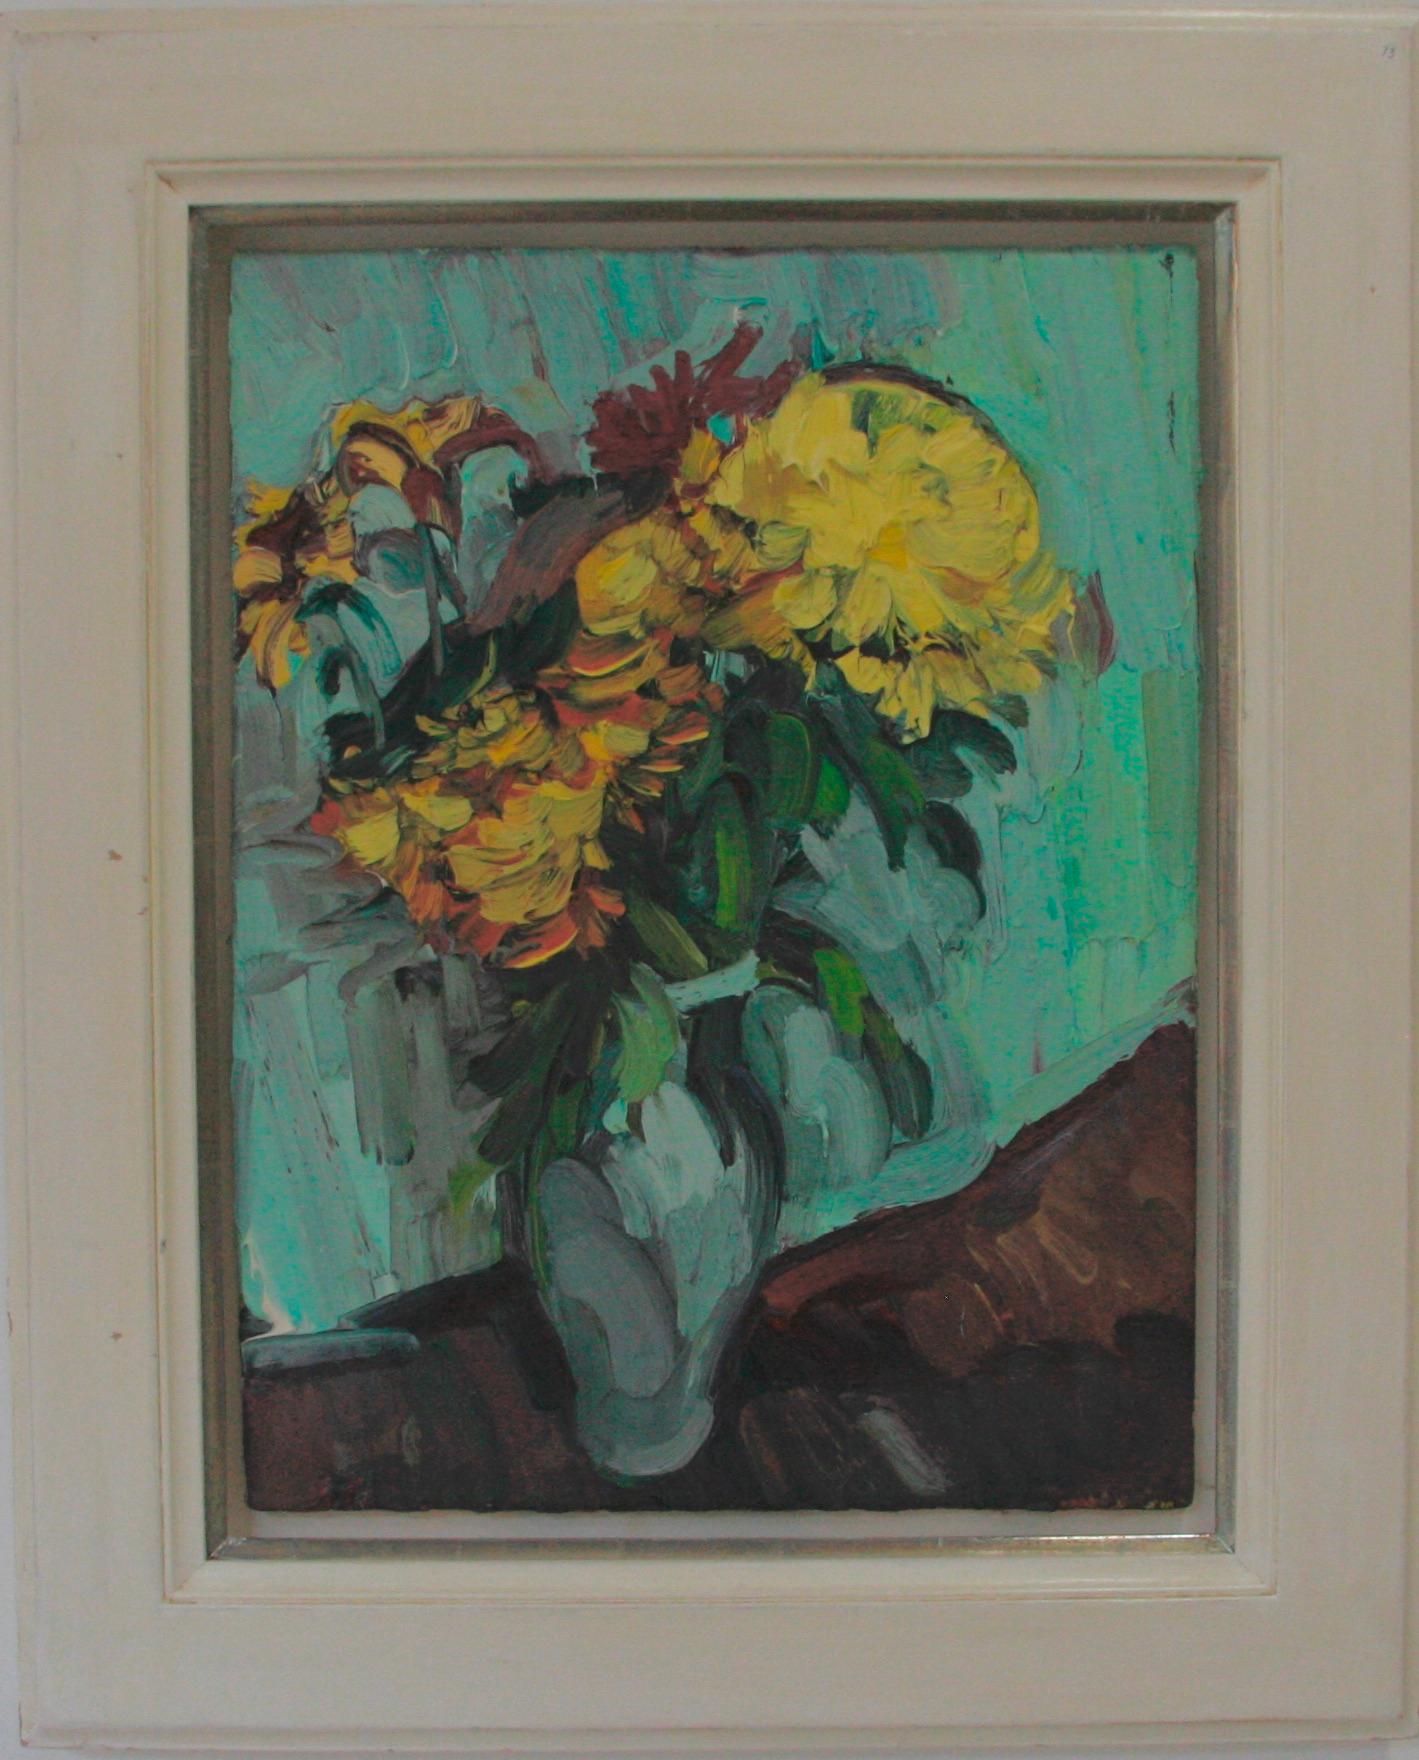 CHRYSANTHEMUMS IN A GREEN VASE EDWARD BEALE British contemporary artist. - Painting by Edward Beale